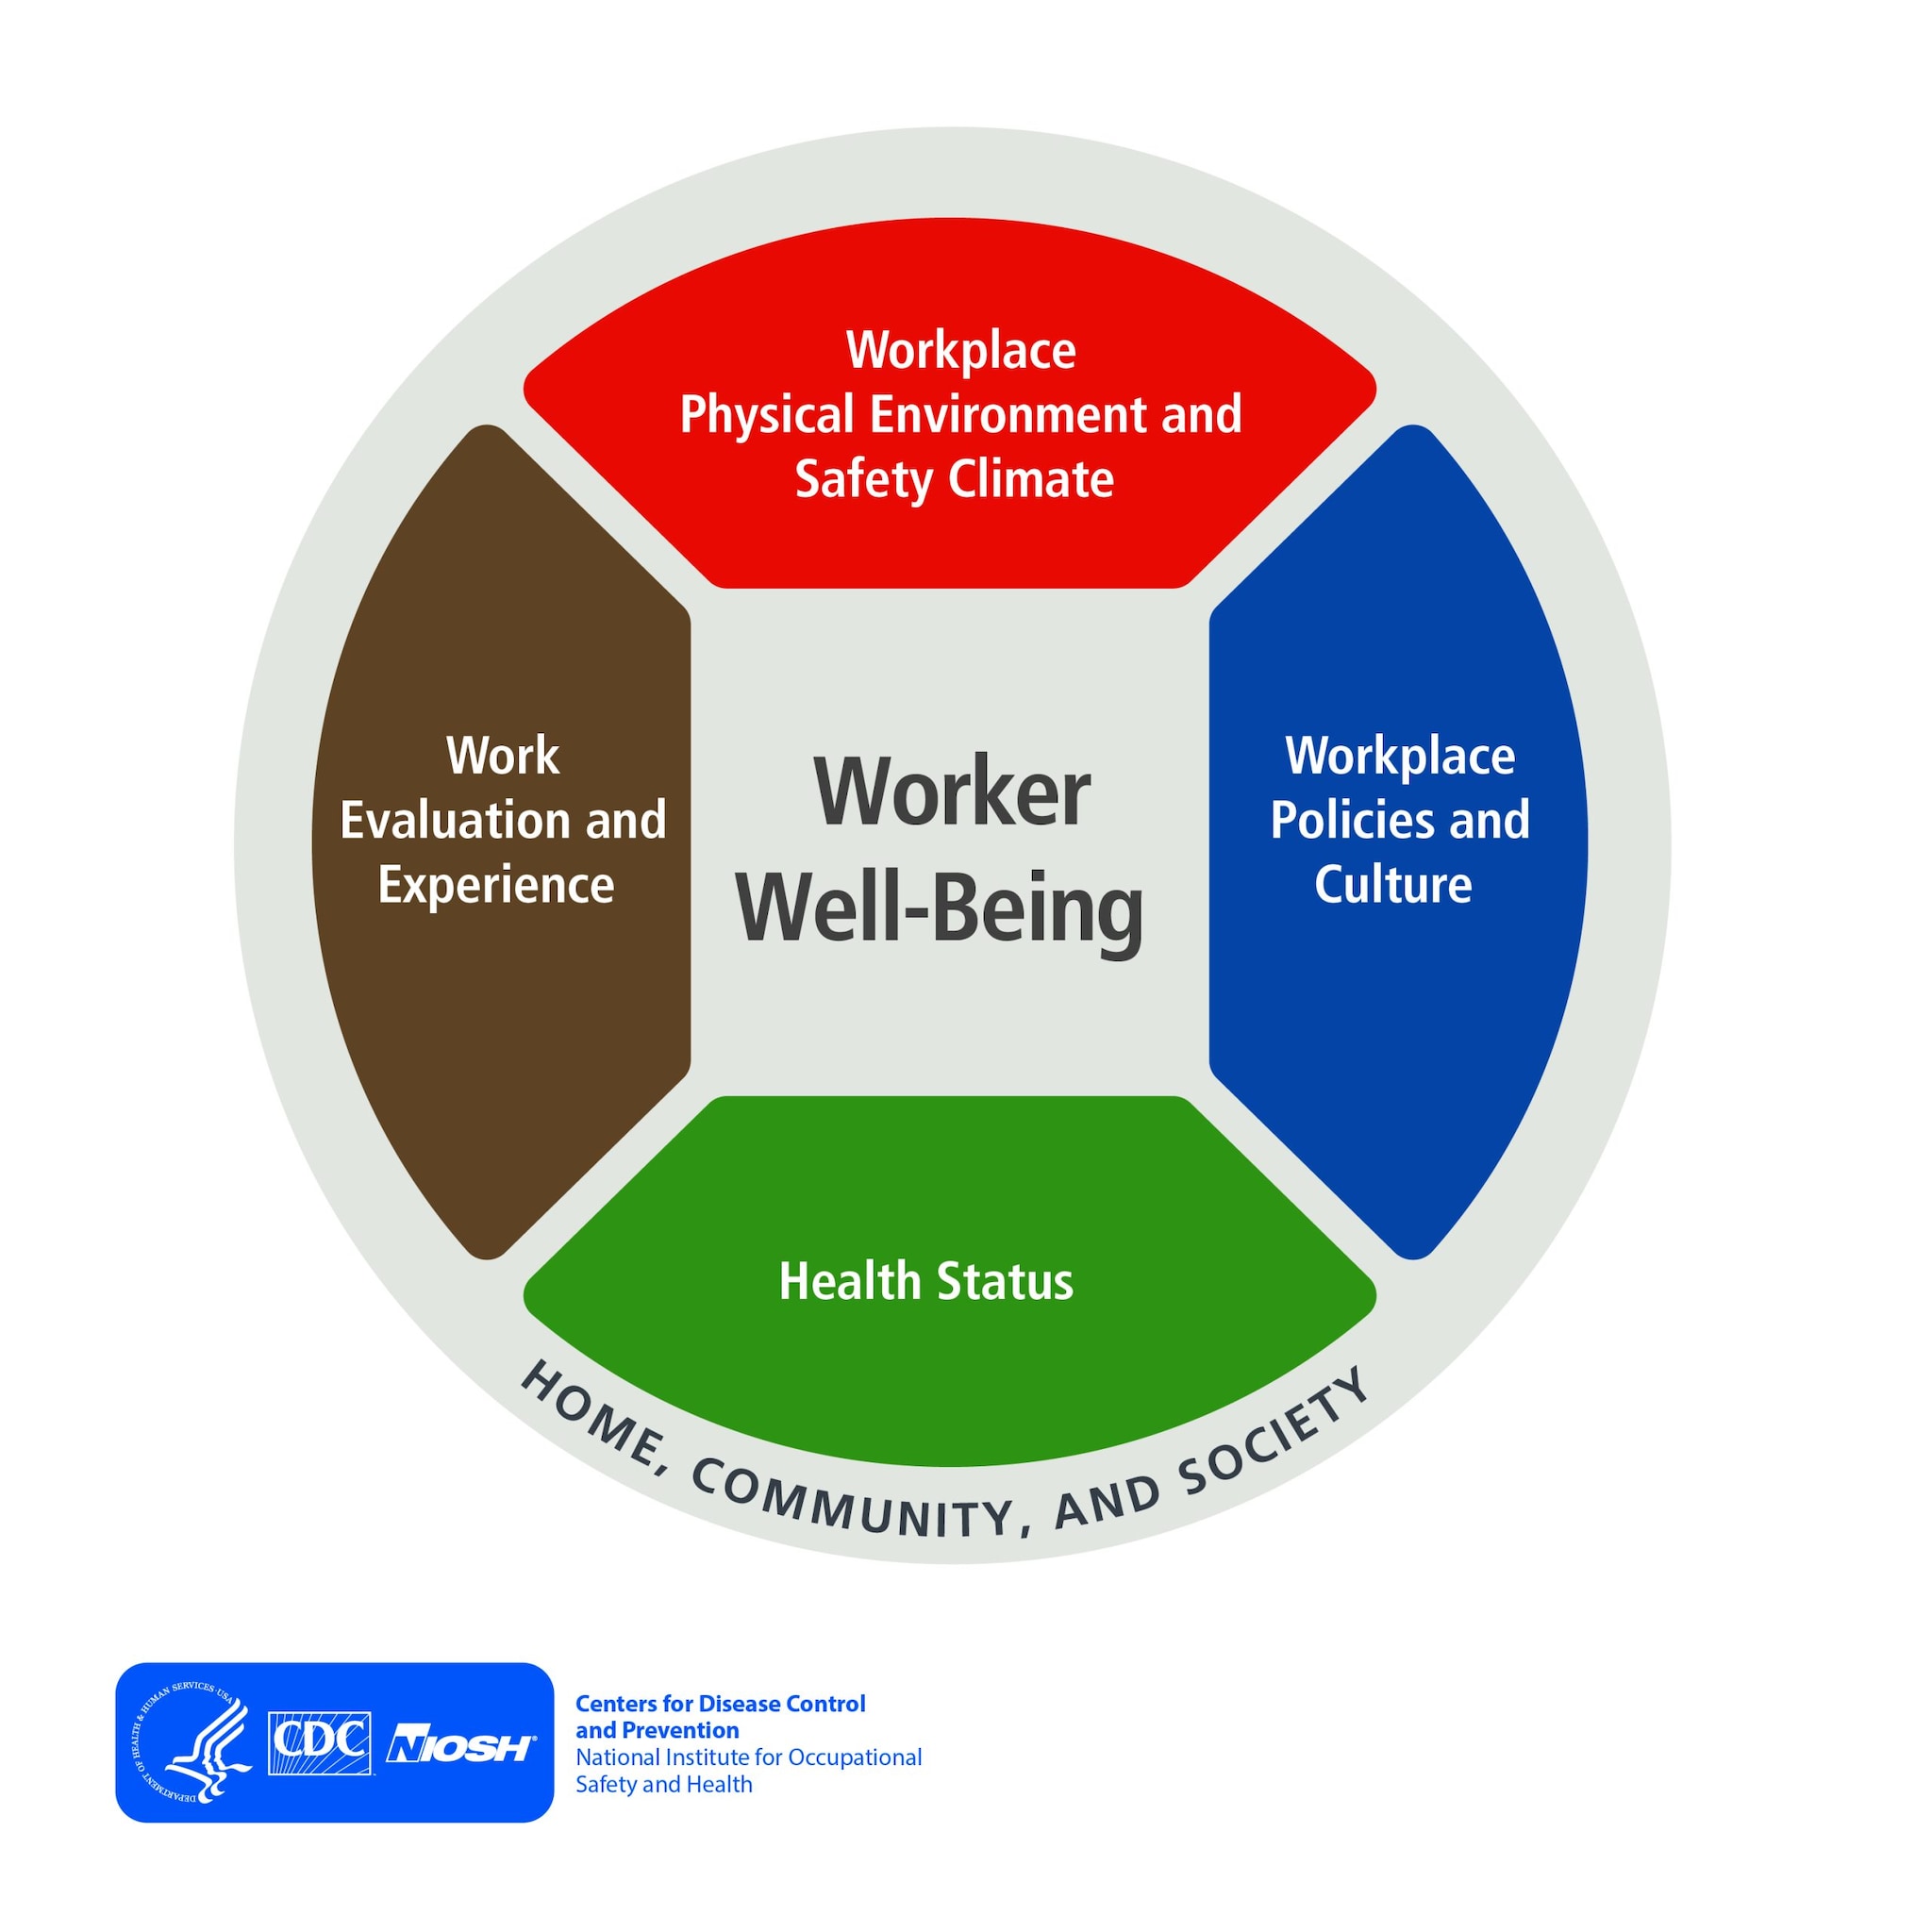 gray circle with four colored sections representing domains of worker well-being